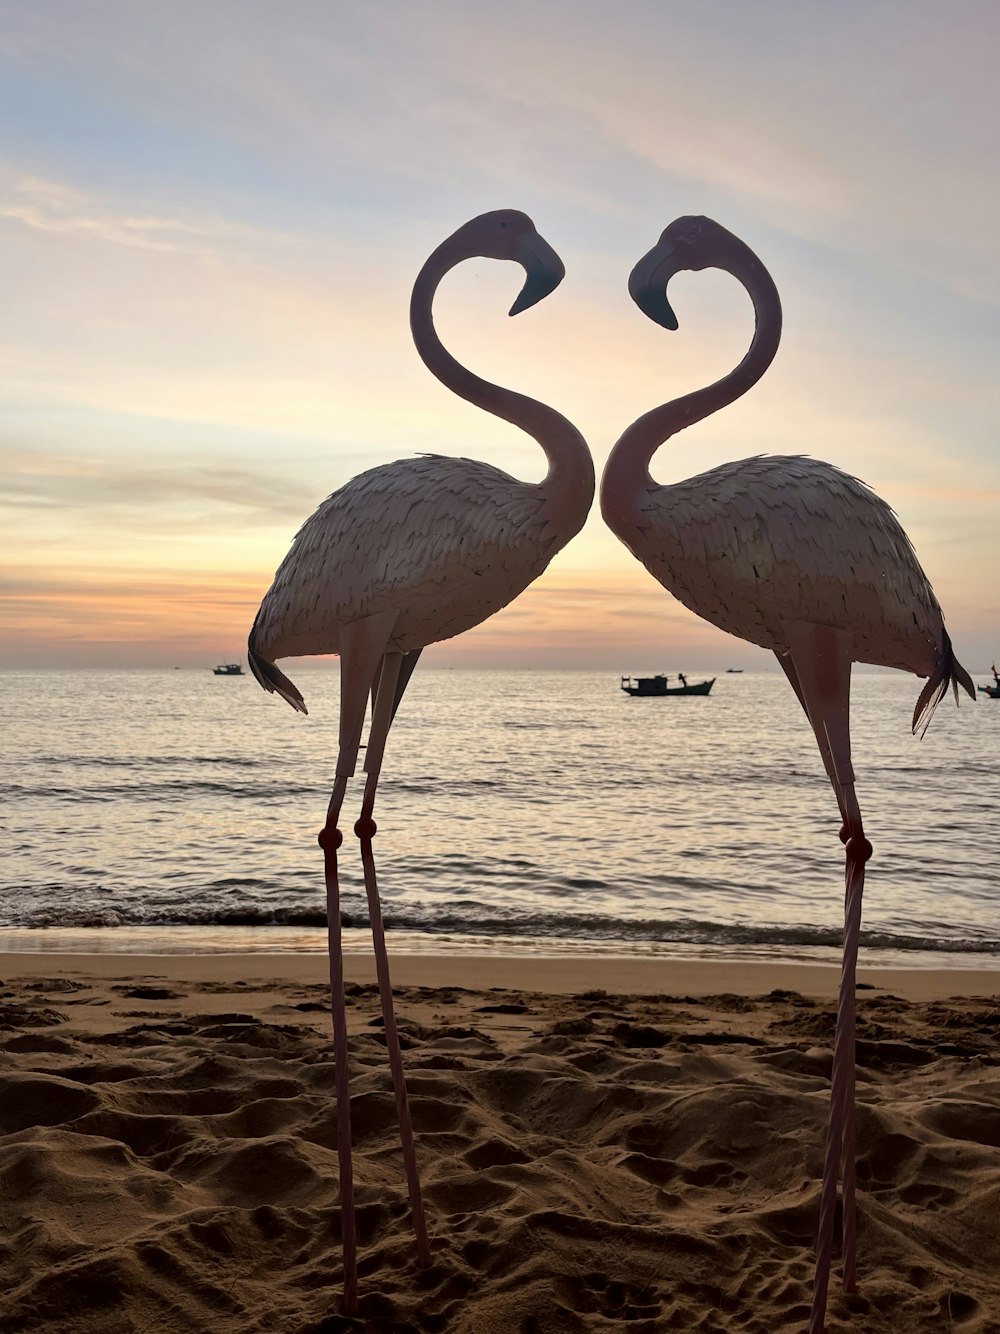 two flamingos standing in the sand on a beach